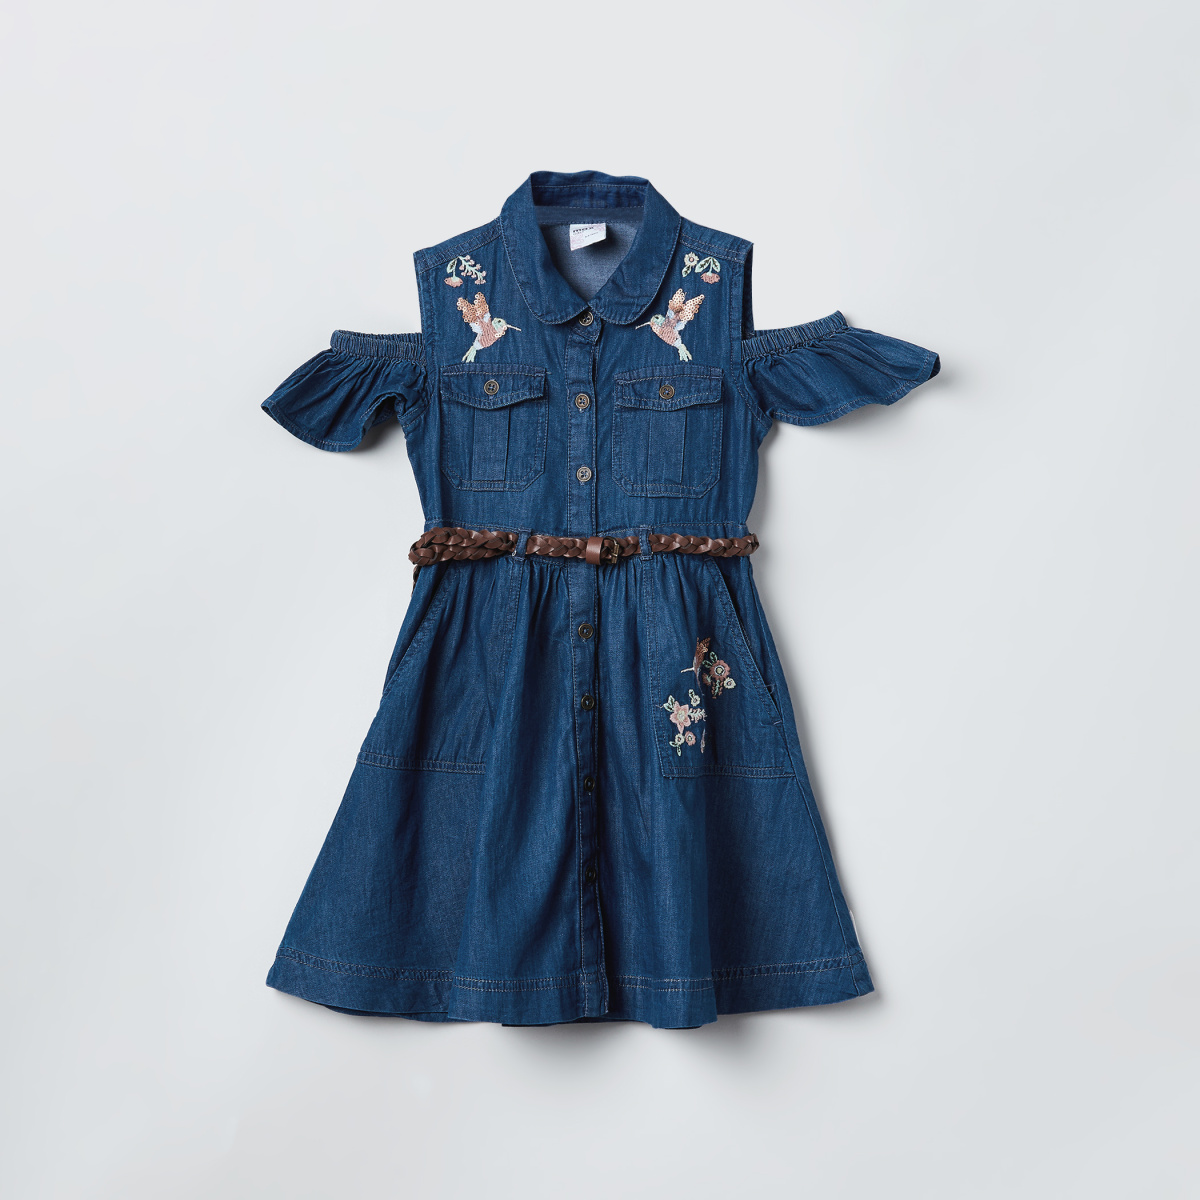 Family Matching Denim Blouse Outfits For Mother And Daughter Mommy And Me T  Shirts And Denim Dress For Women Set 230316 From Kong06, $15.81 | DHgate.Com